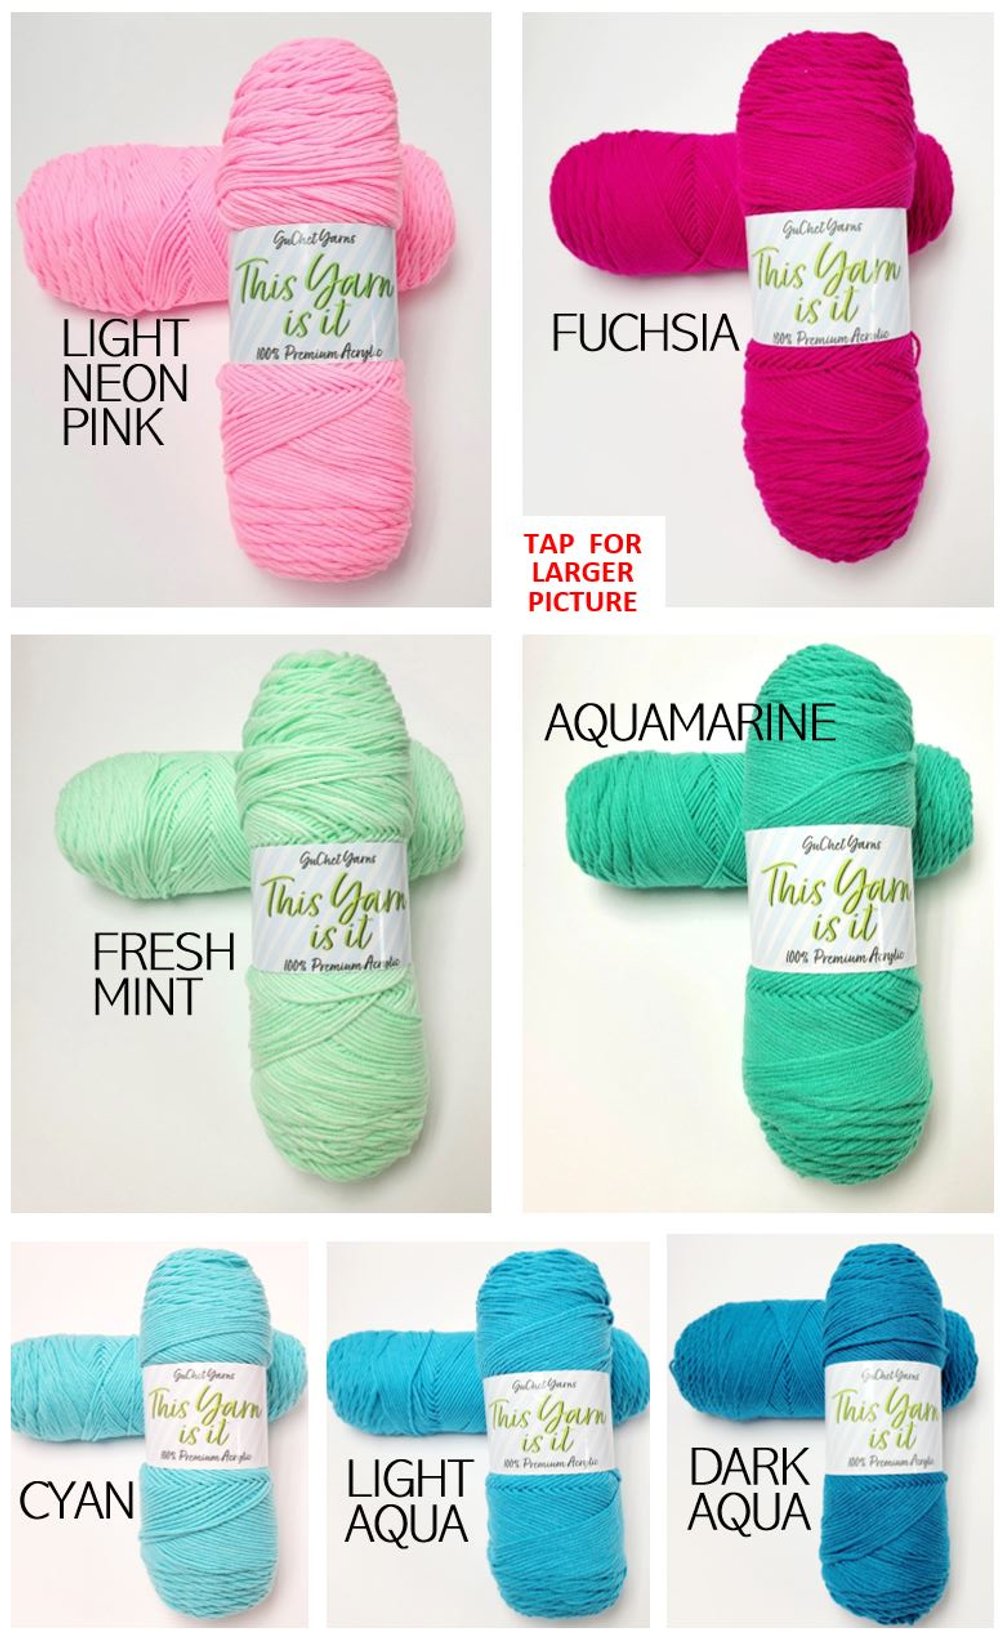 Yarn Needles by GuChet —  - Yarns, Patterns and Accessories